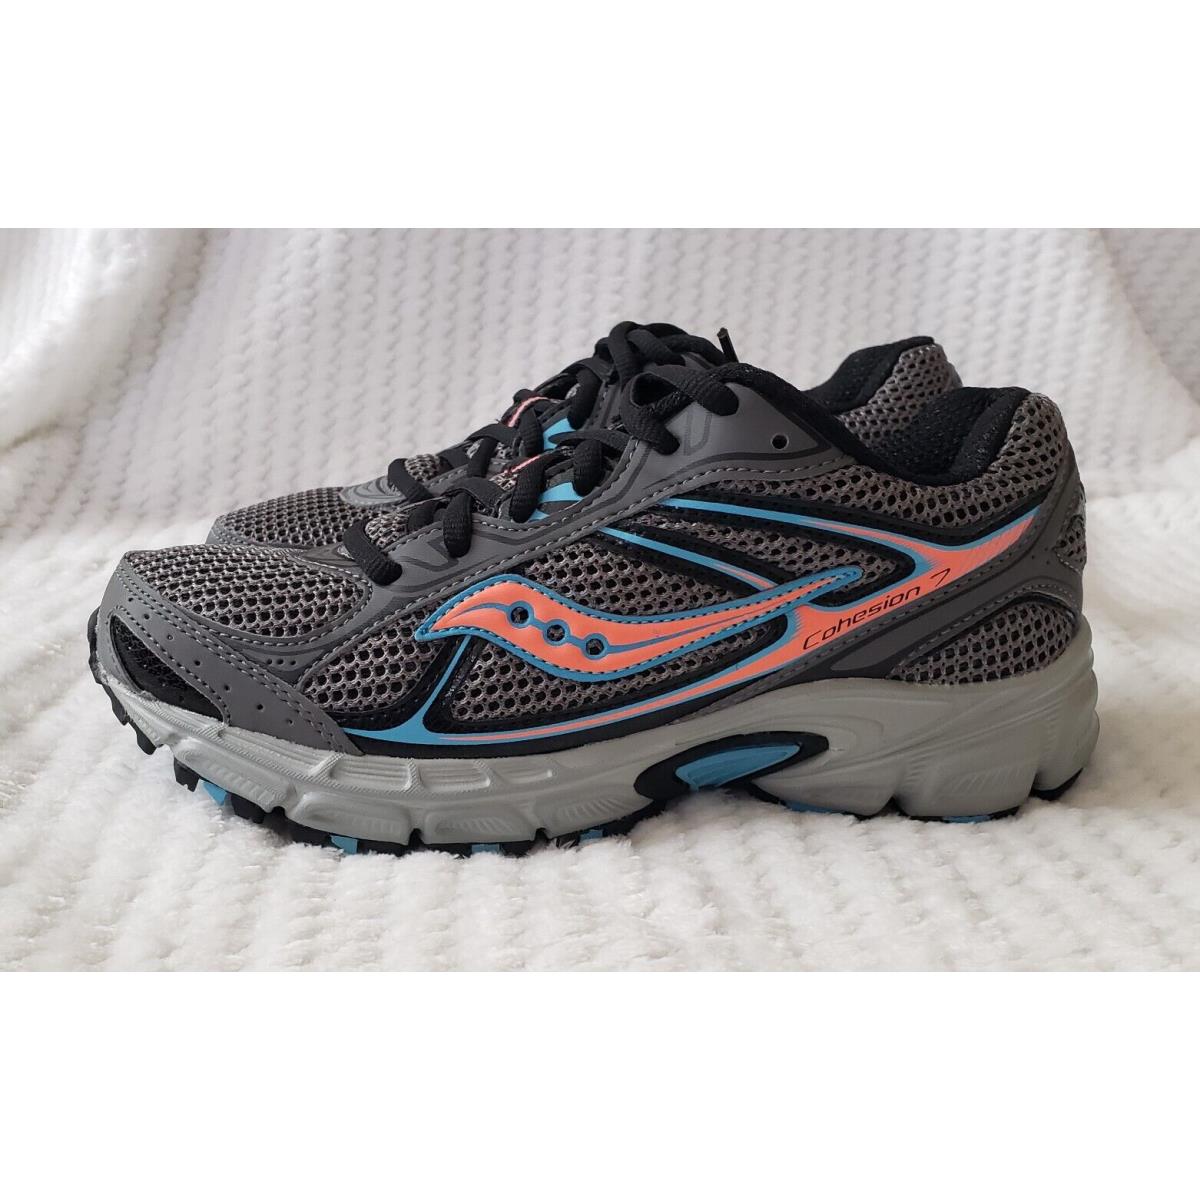 Saucony Cohesion 7 Grid Running Athletic Shoes Grey/blue/coral Womens US 6